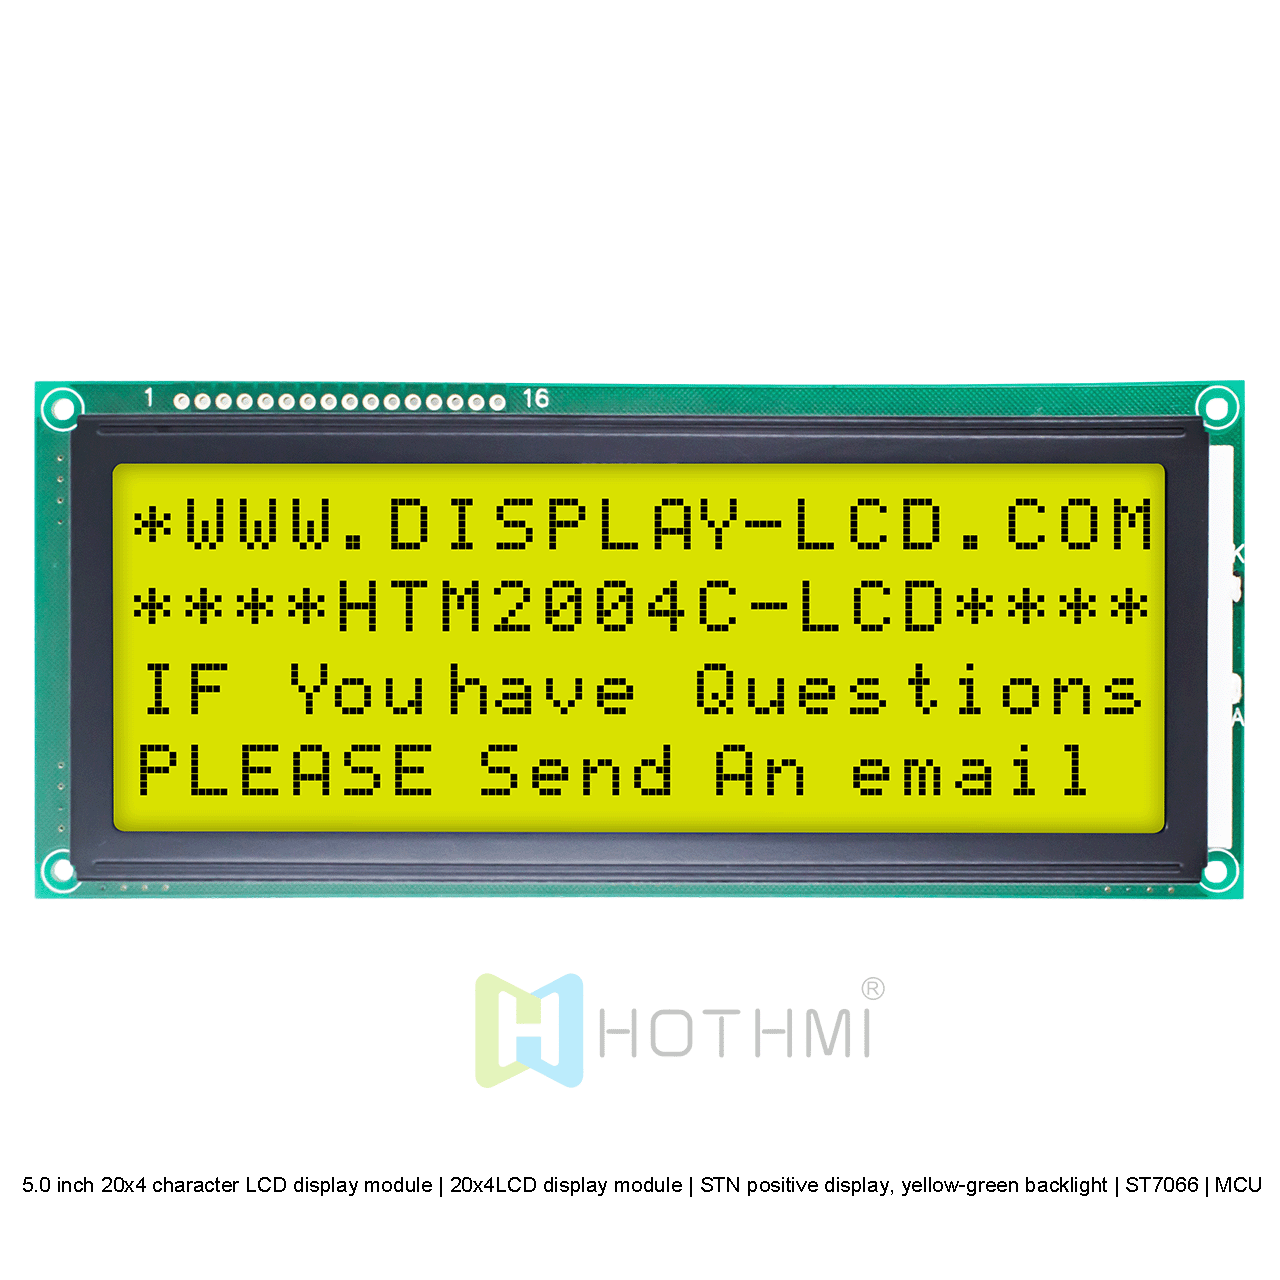 5.0 inch 20x4 character LCD display module | 20x4LCD display module | STN positive display, yellow-green backlight | ST7066 | MCU interface